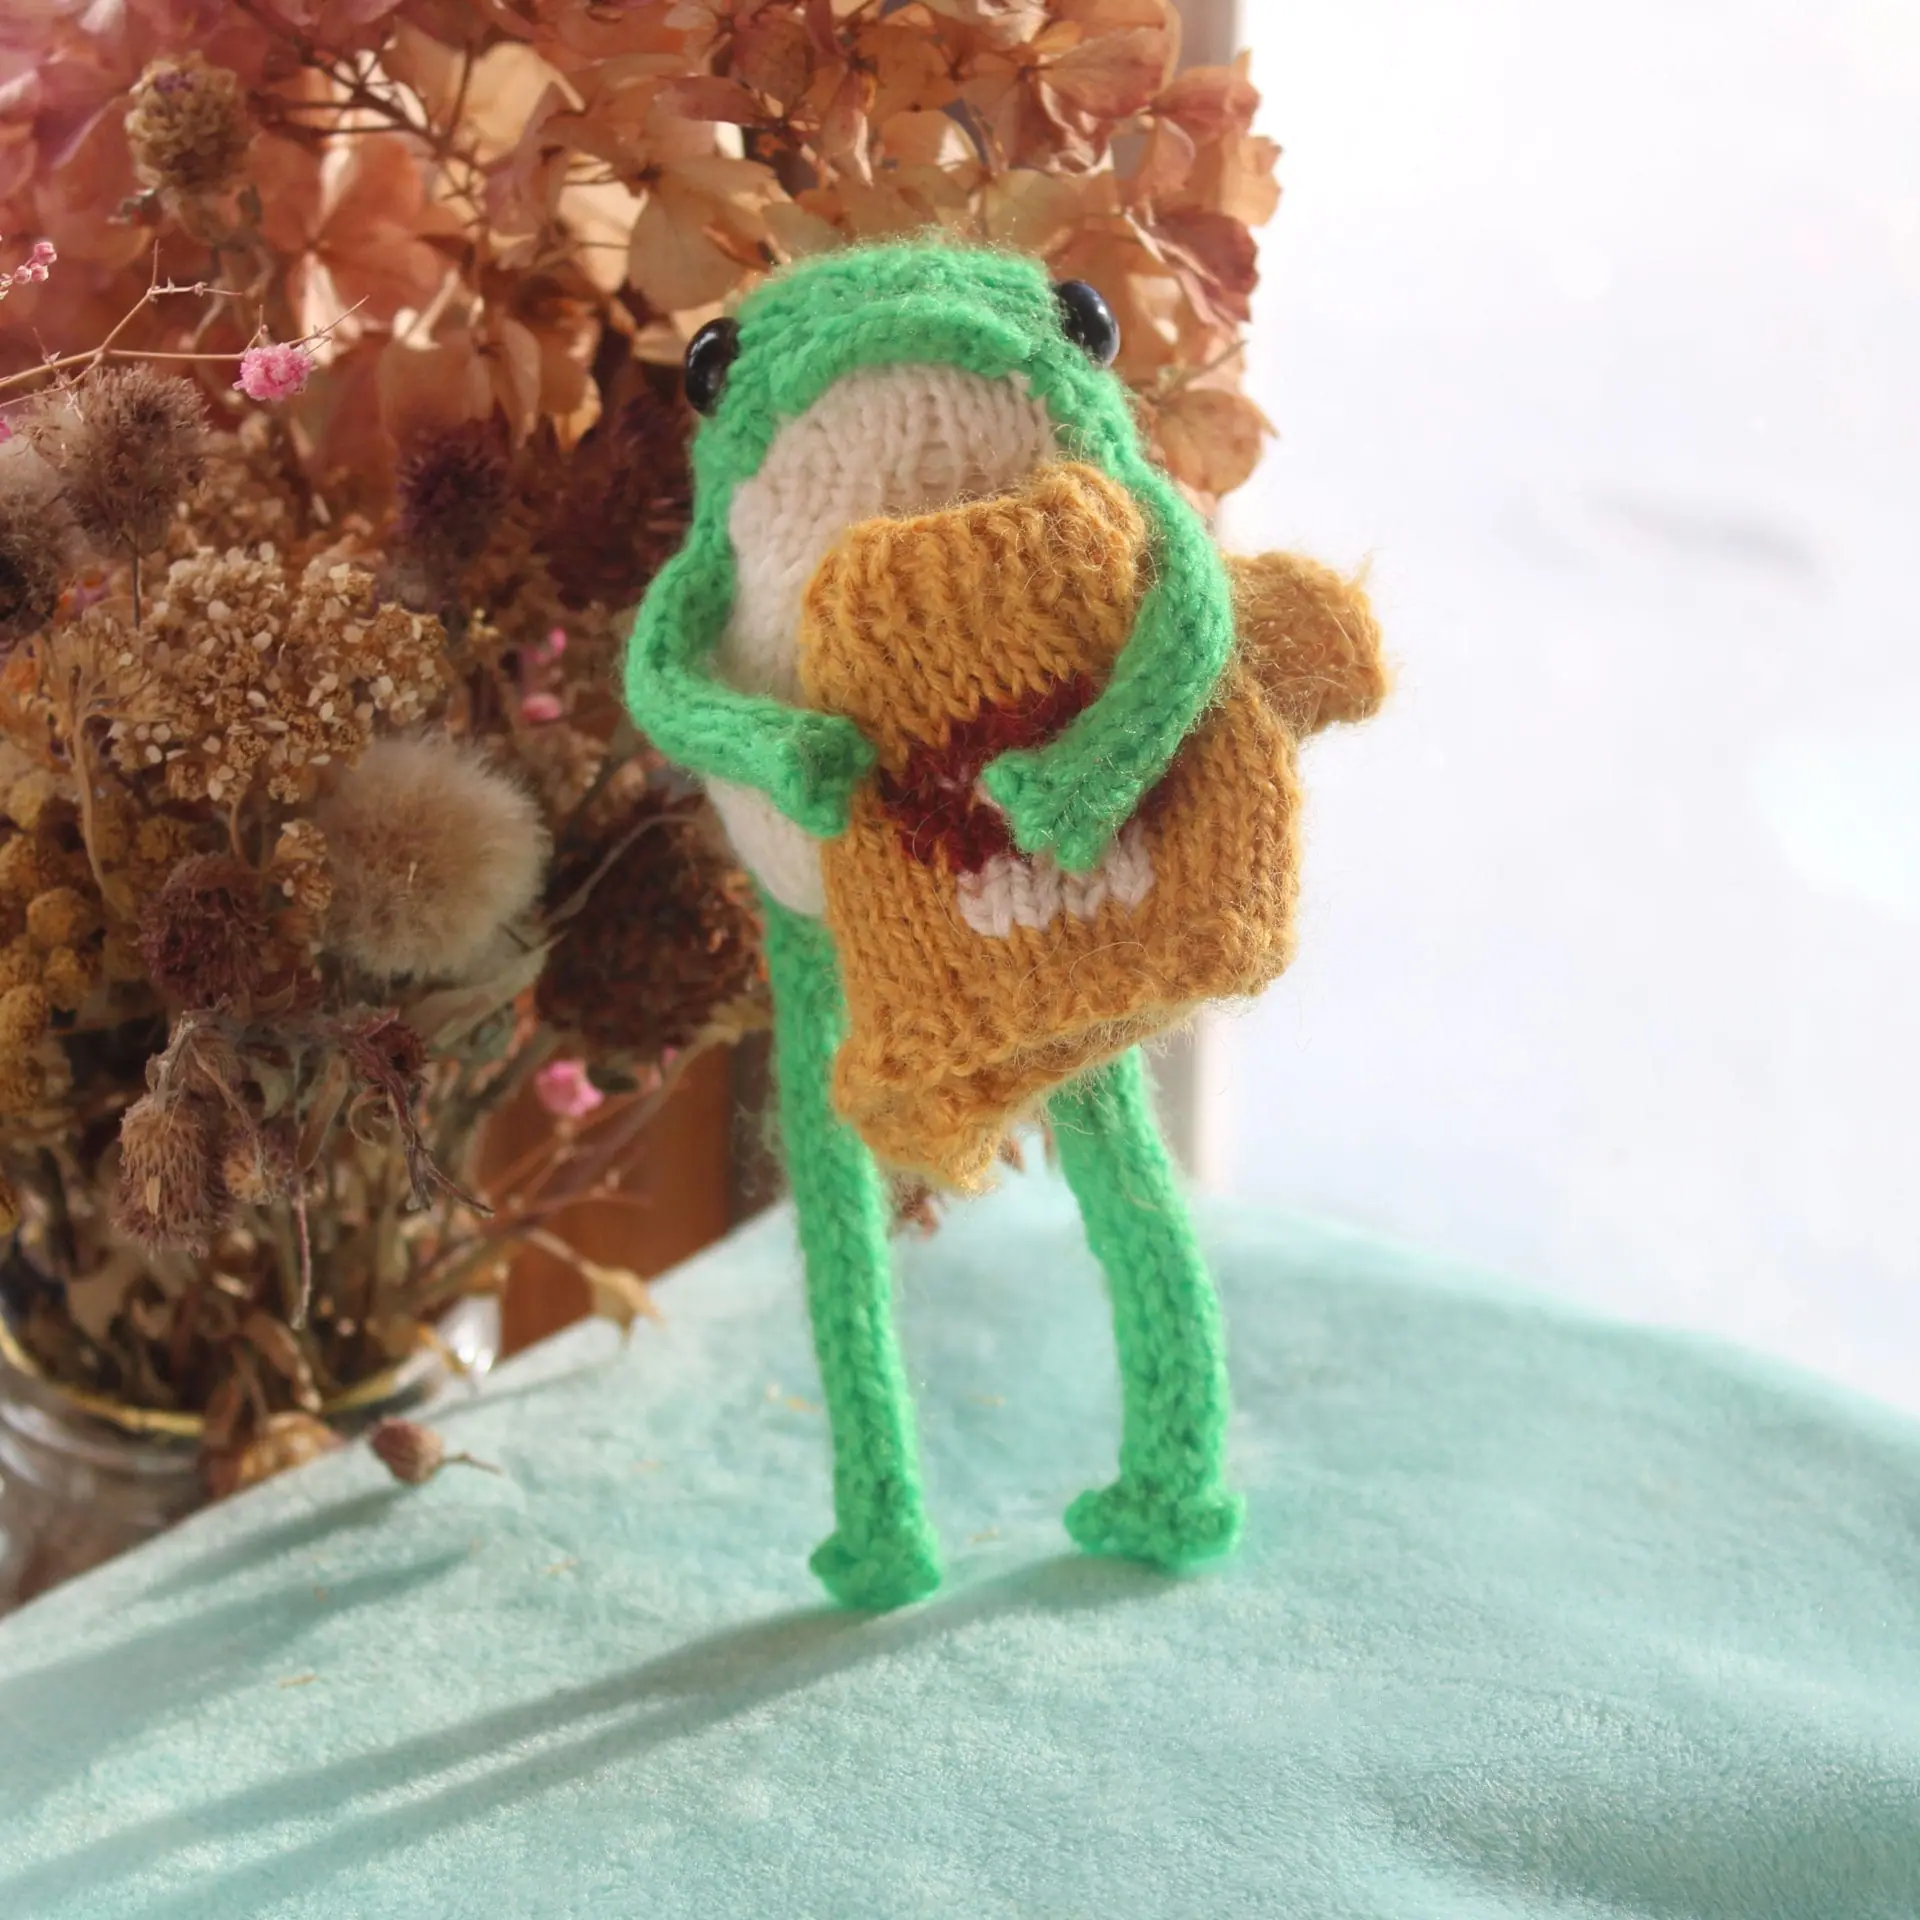 Knitted frog from Tik Tok 1 new green frog knitted cute frog